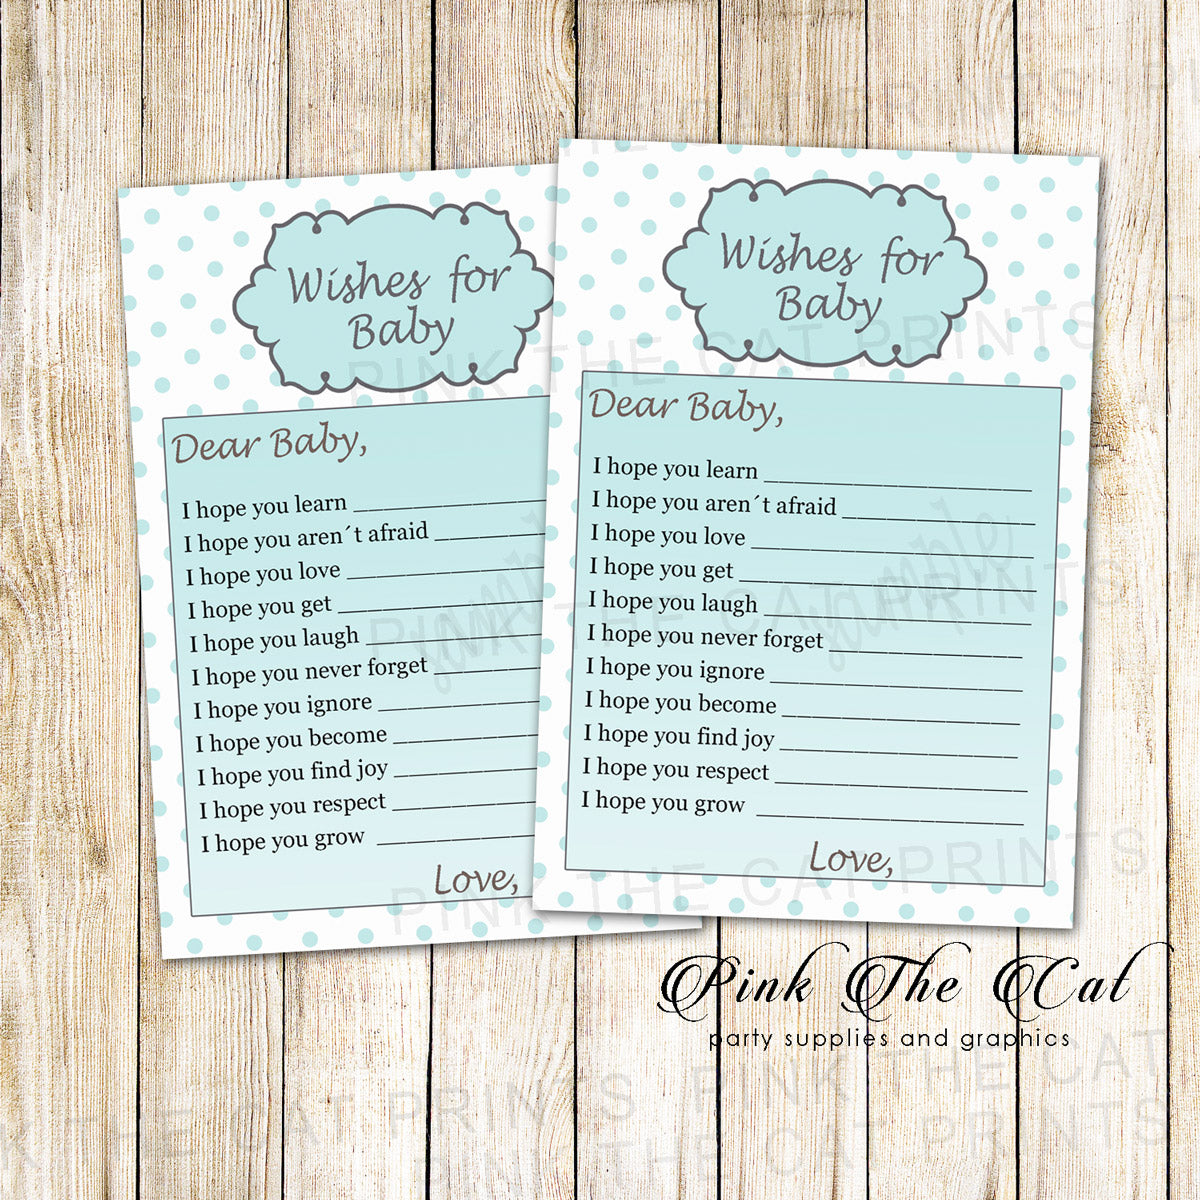 Wishes for Baby Card Teal Polka Dots